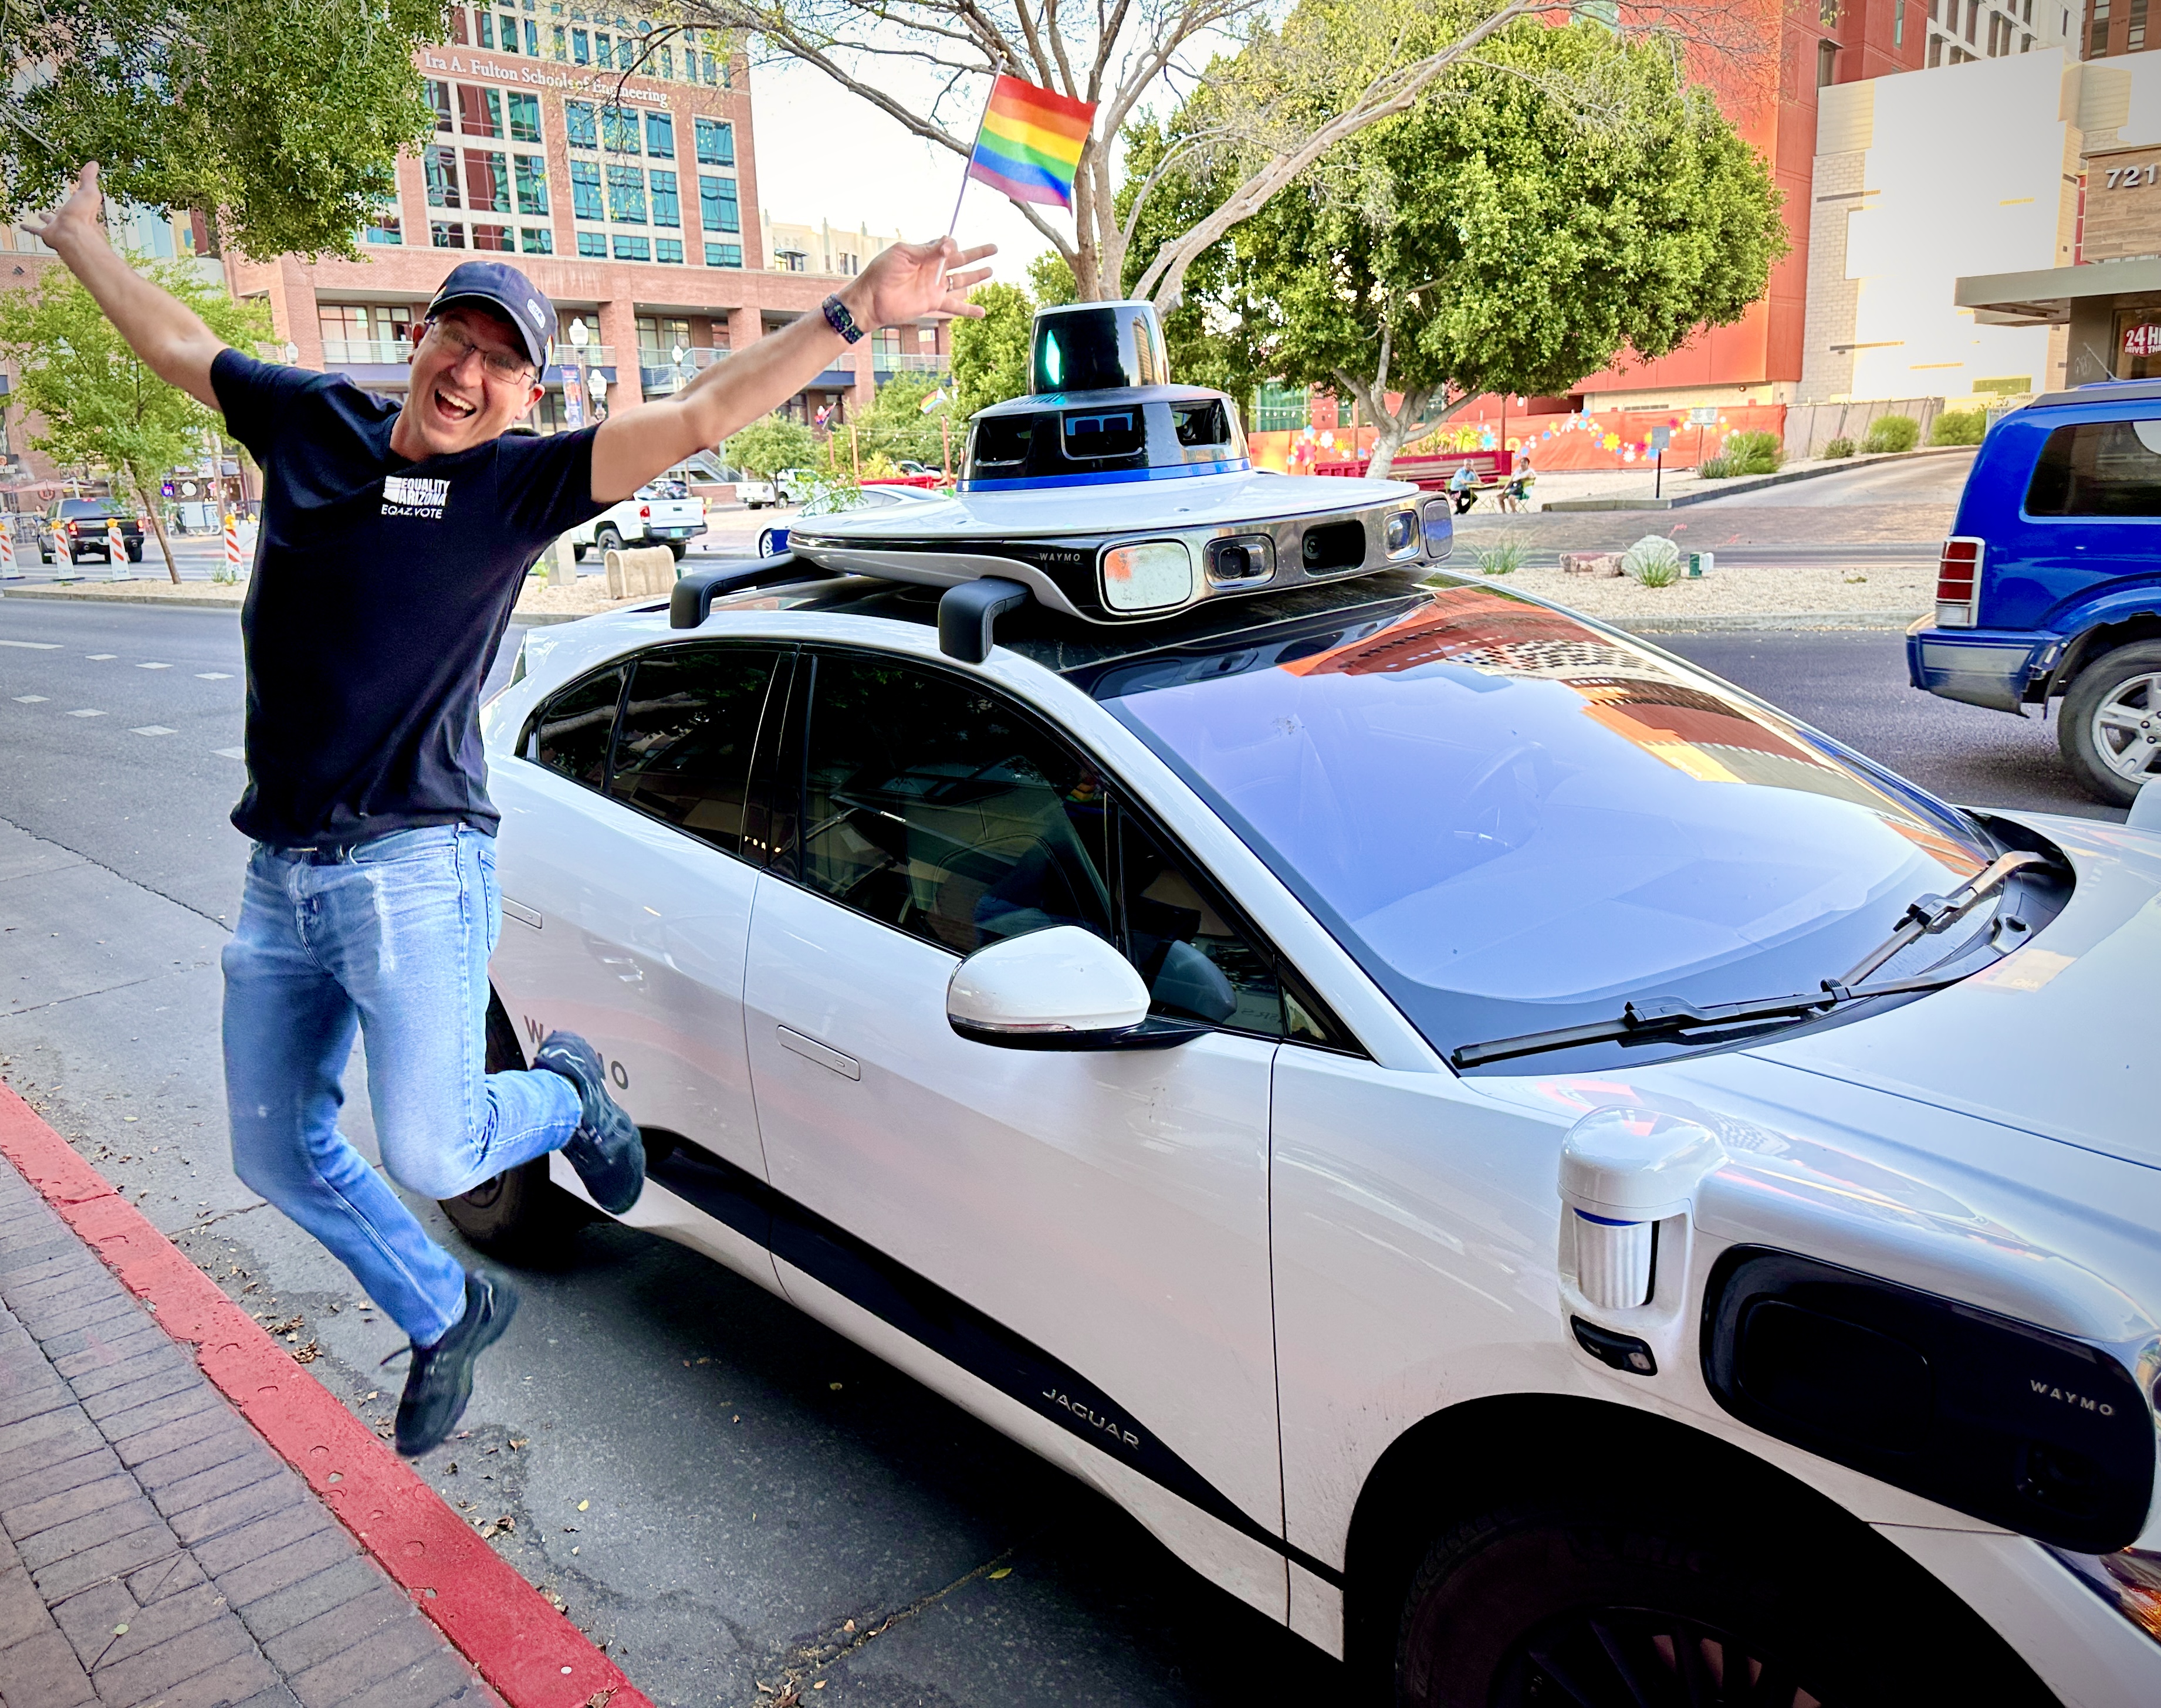 Man holding a rainbow Pride flag, jumping in the air in front of a parked Waymo vehicle